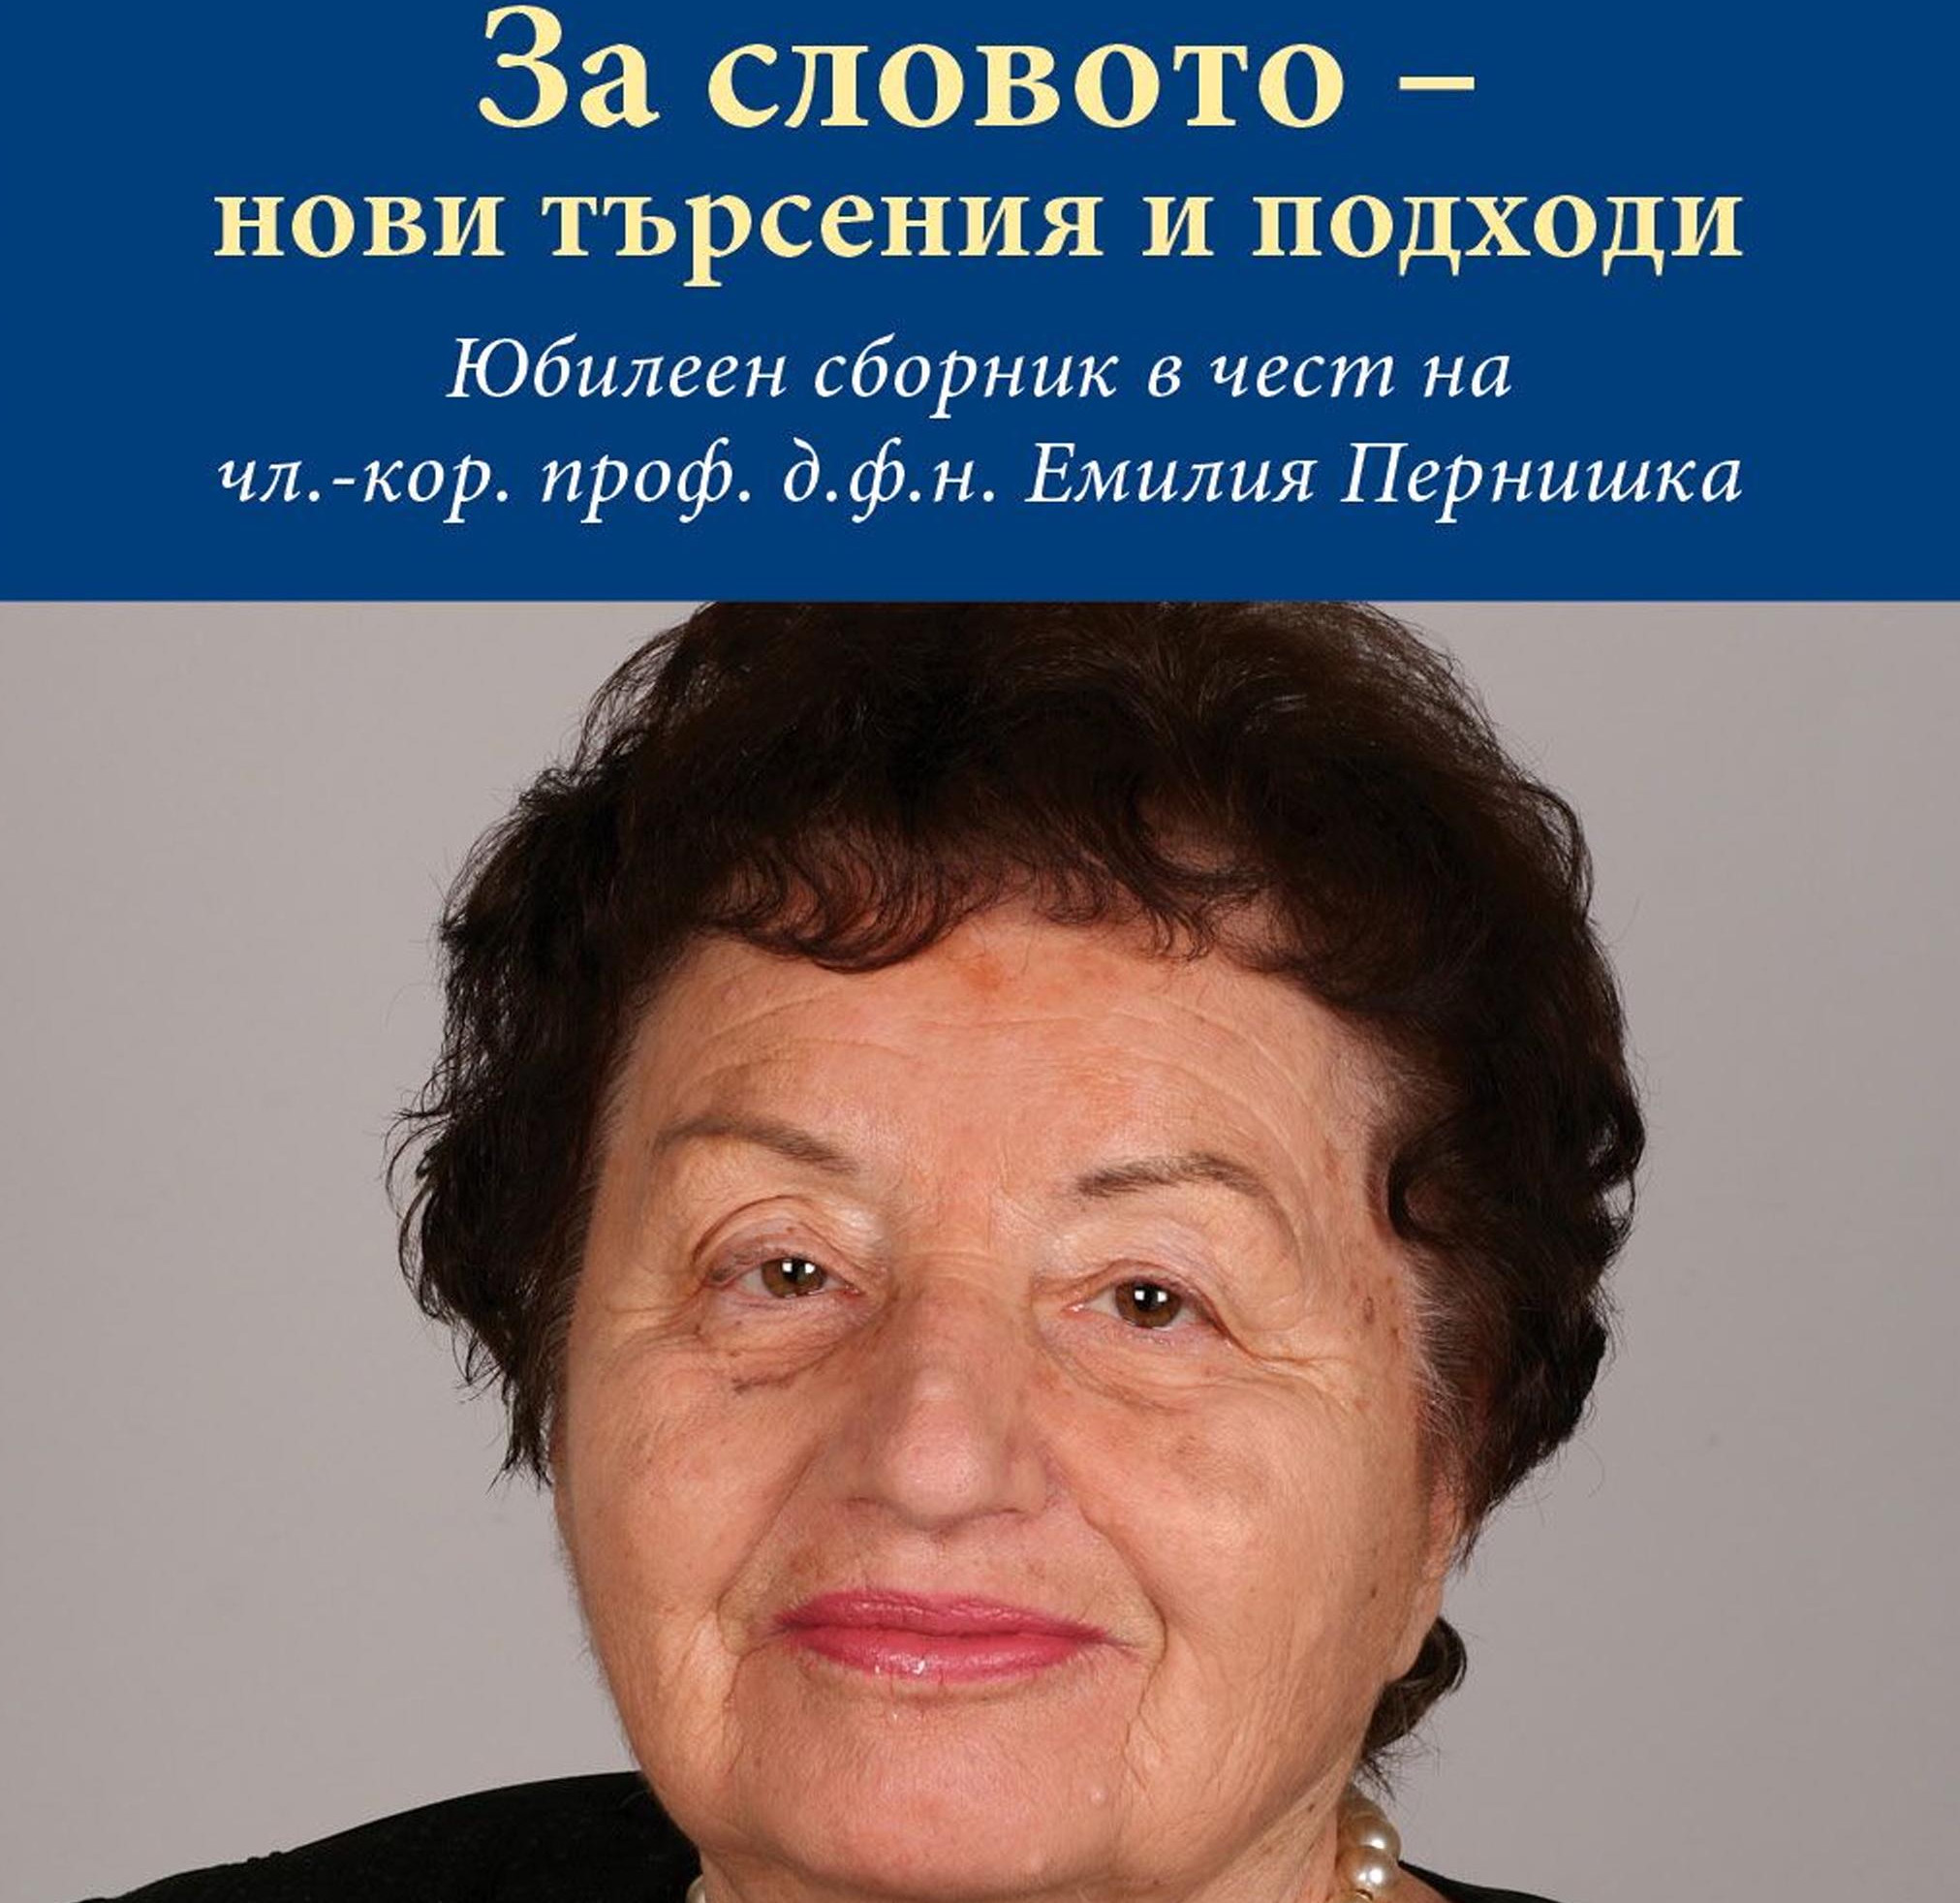 Jubilee Collection Dedicated to the 80th Anniversary of Cor. Member Prof. Emiliya Pernishka